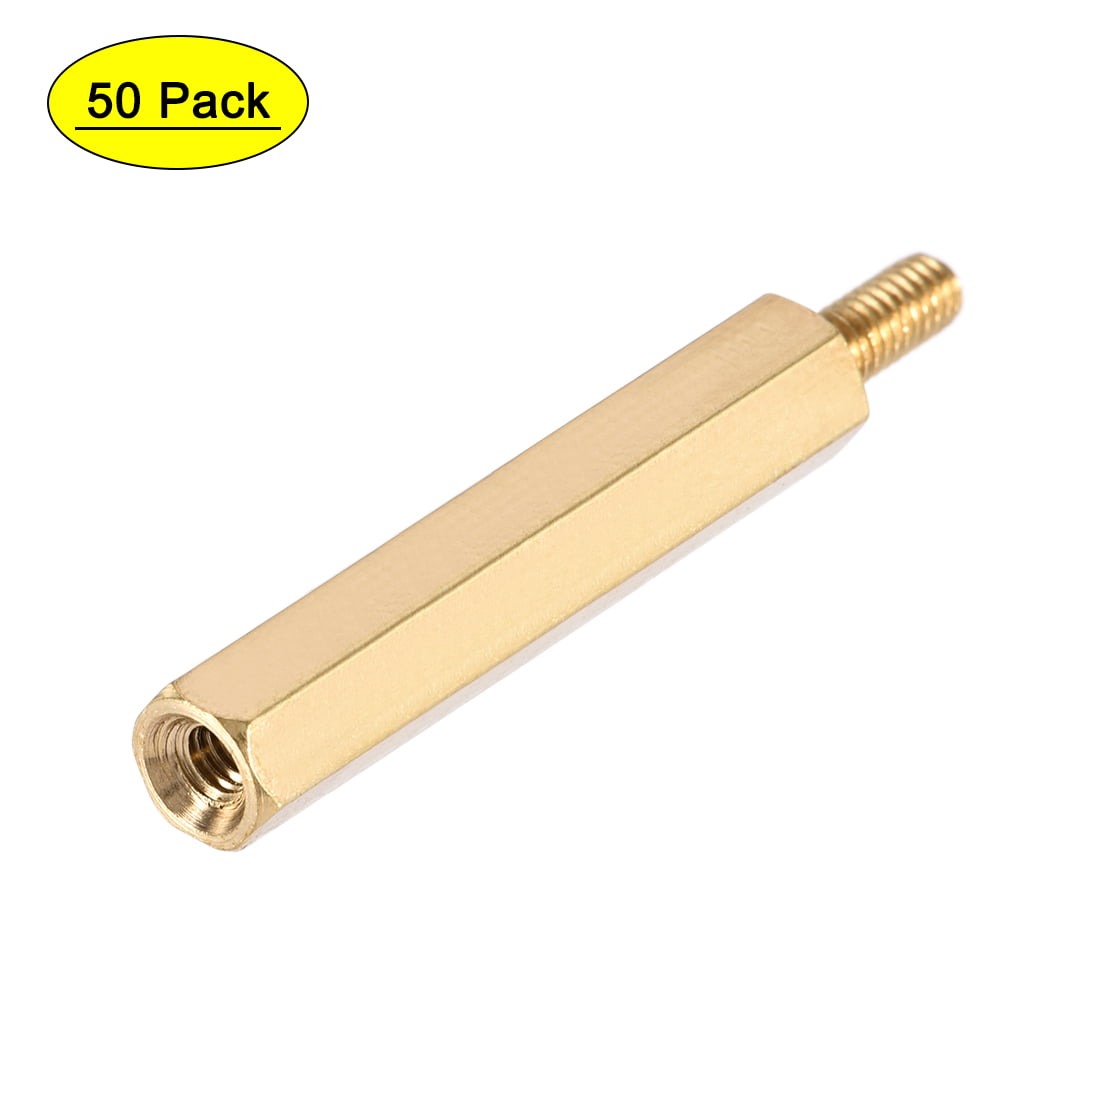 6 mm Male to Female Hex Brass Spacer Standoff 50pcs M2.5 x 12 mm 